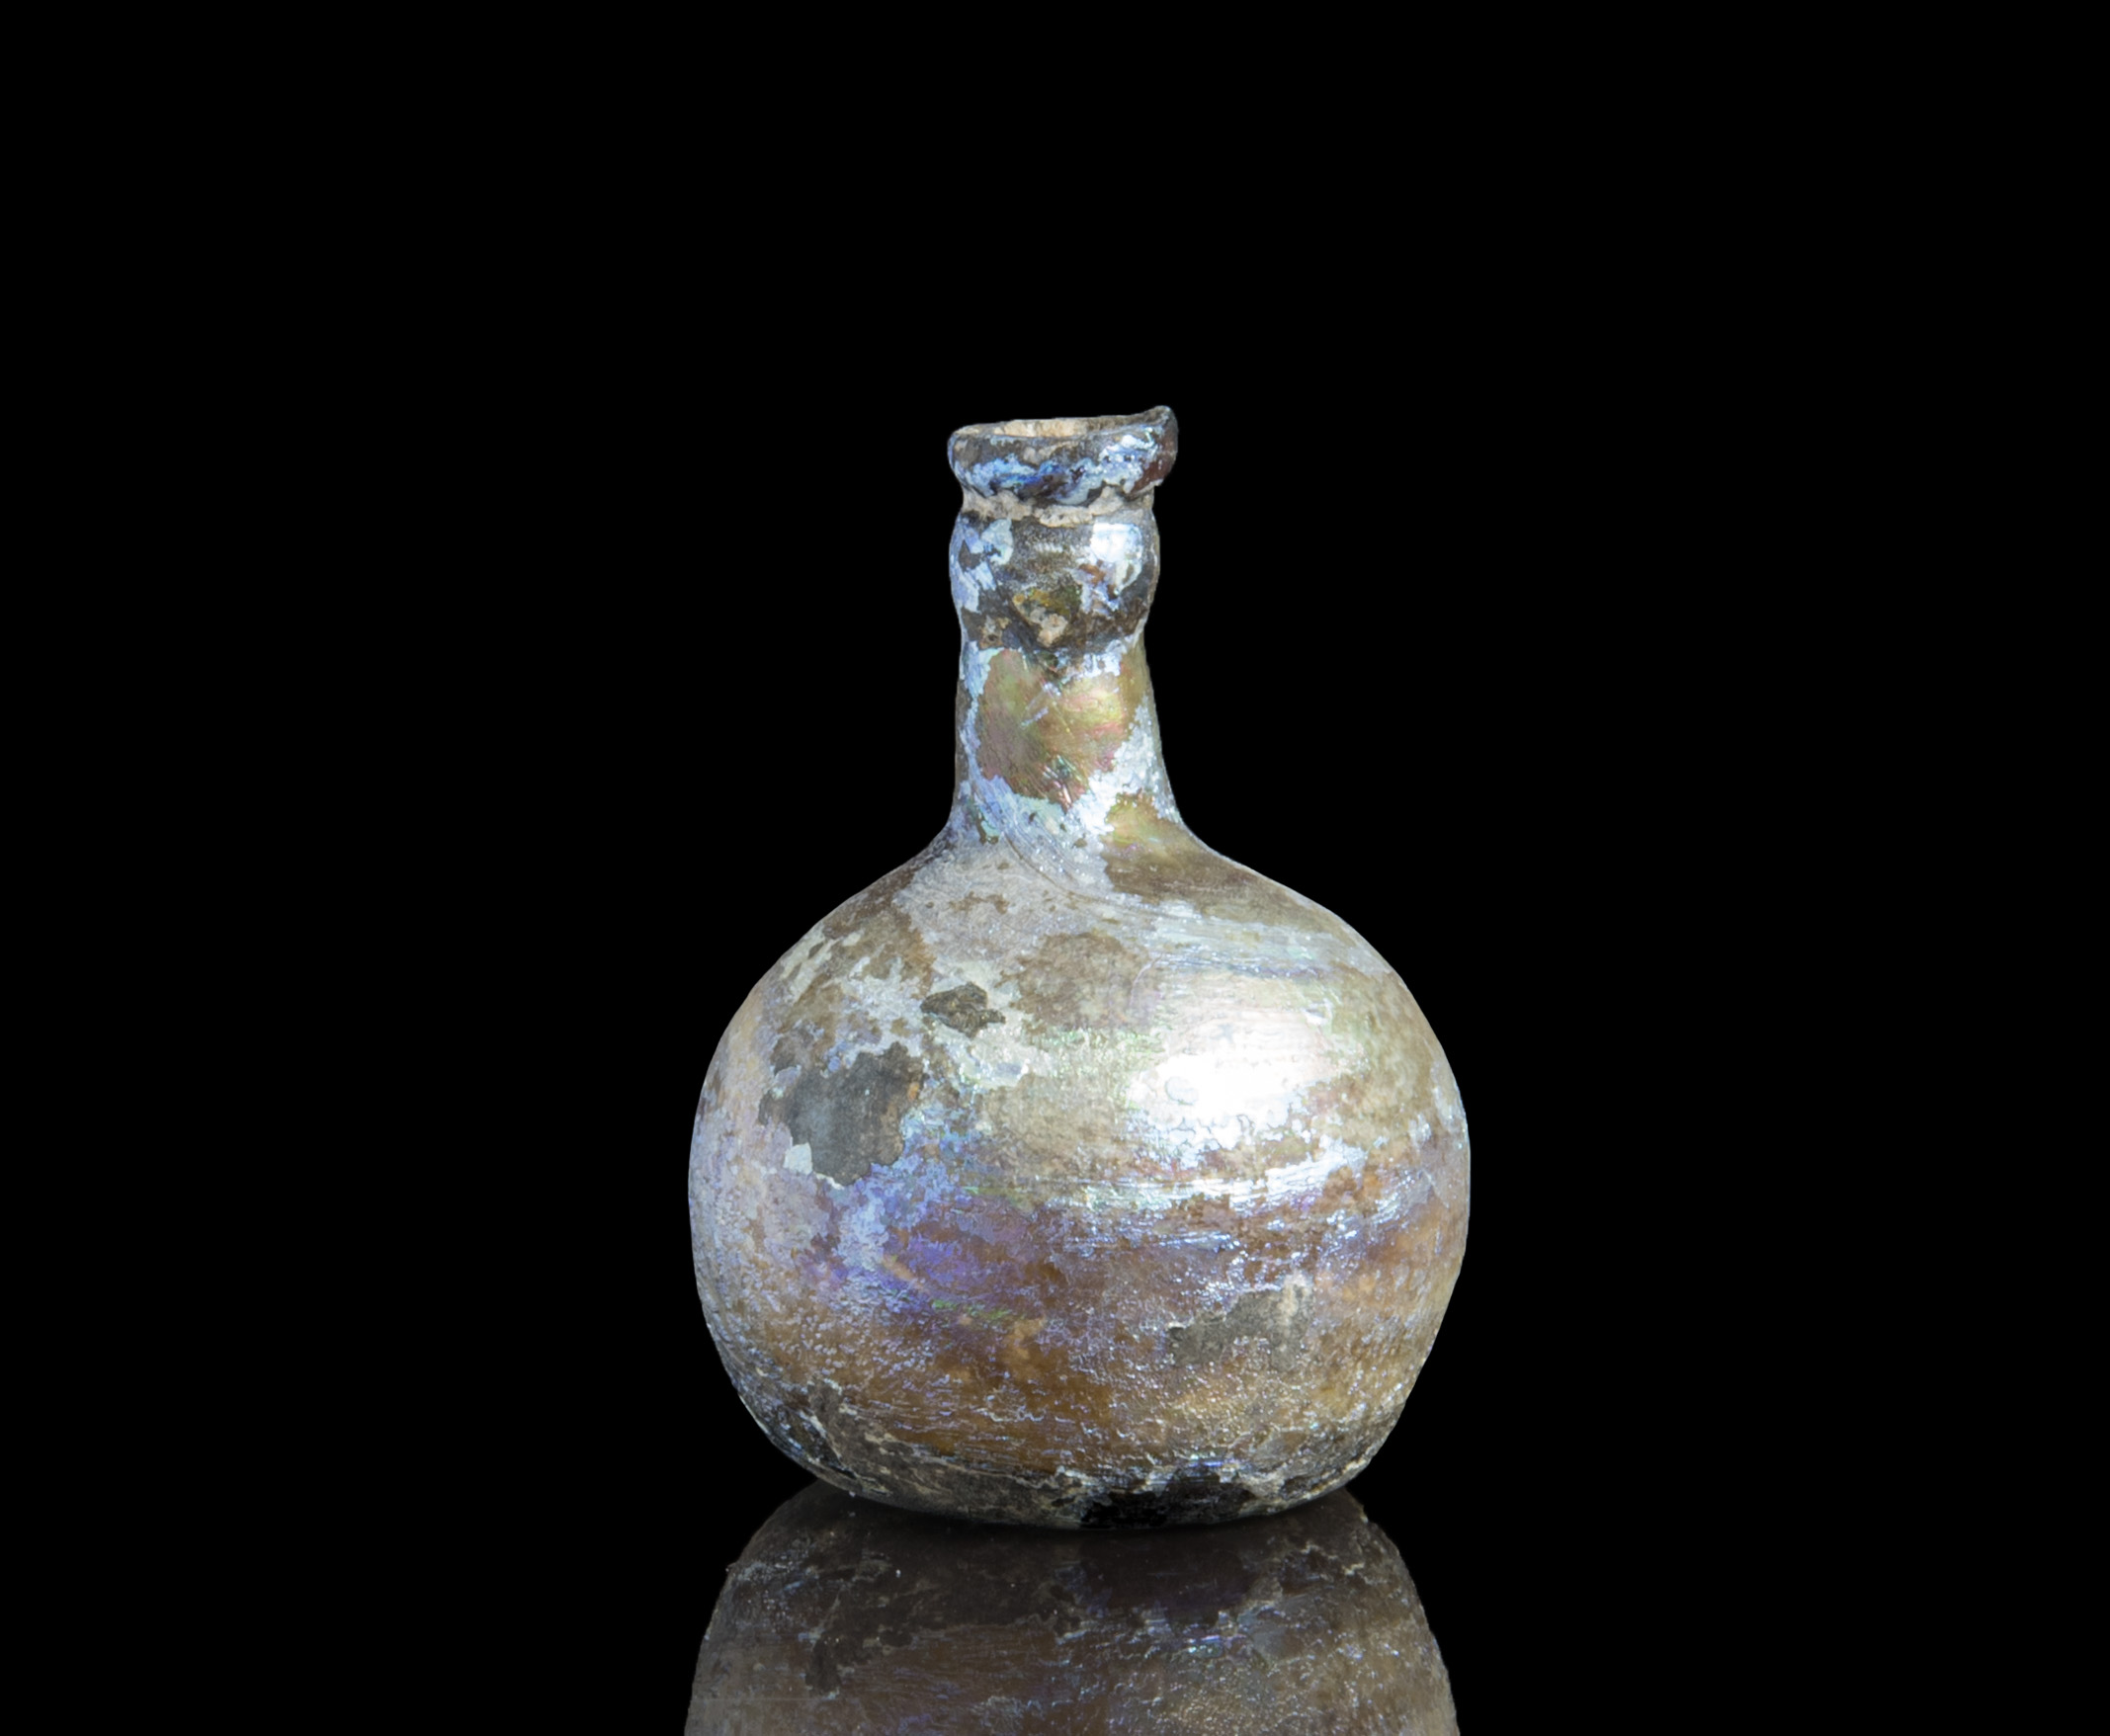 Ancient Roman glass cosmetics flask with pretty iridescence Antiquities